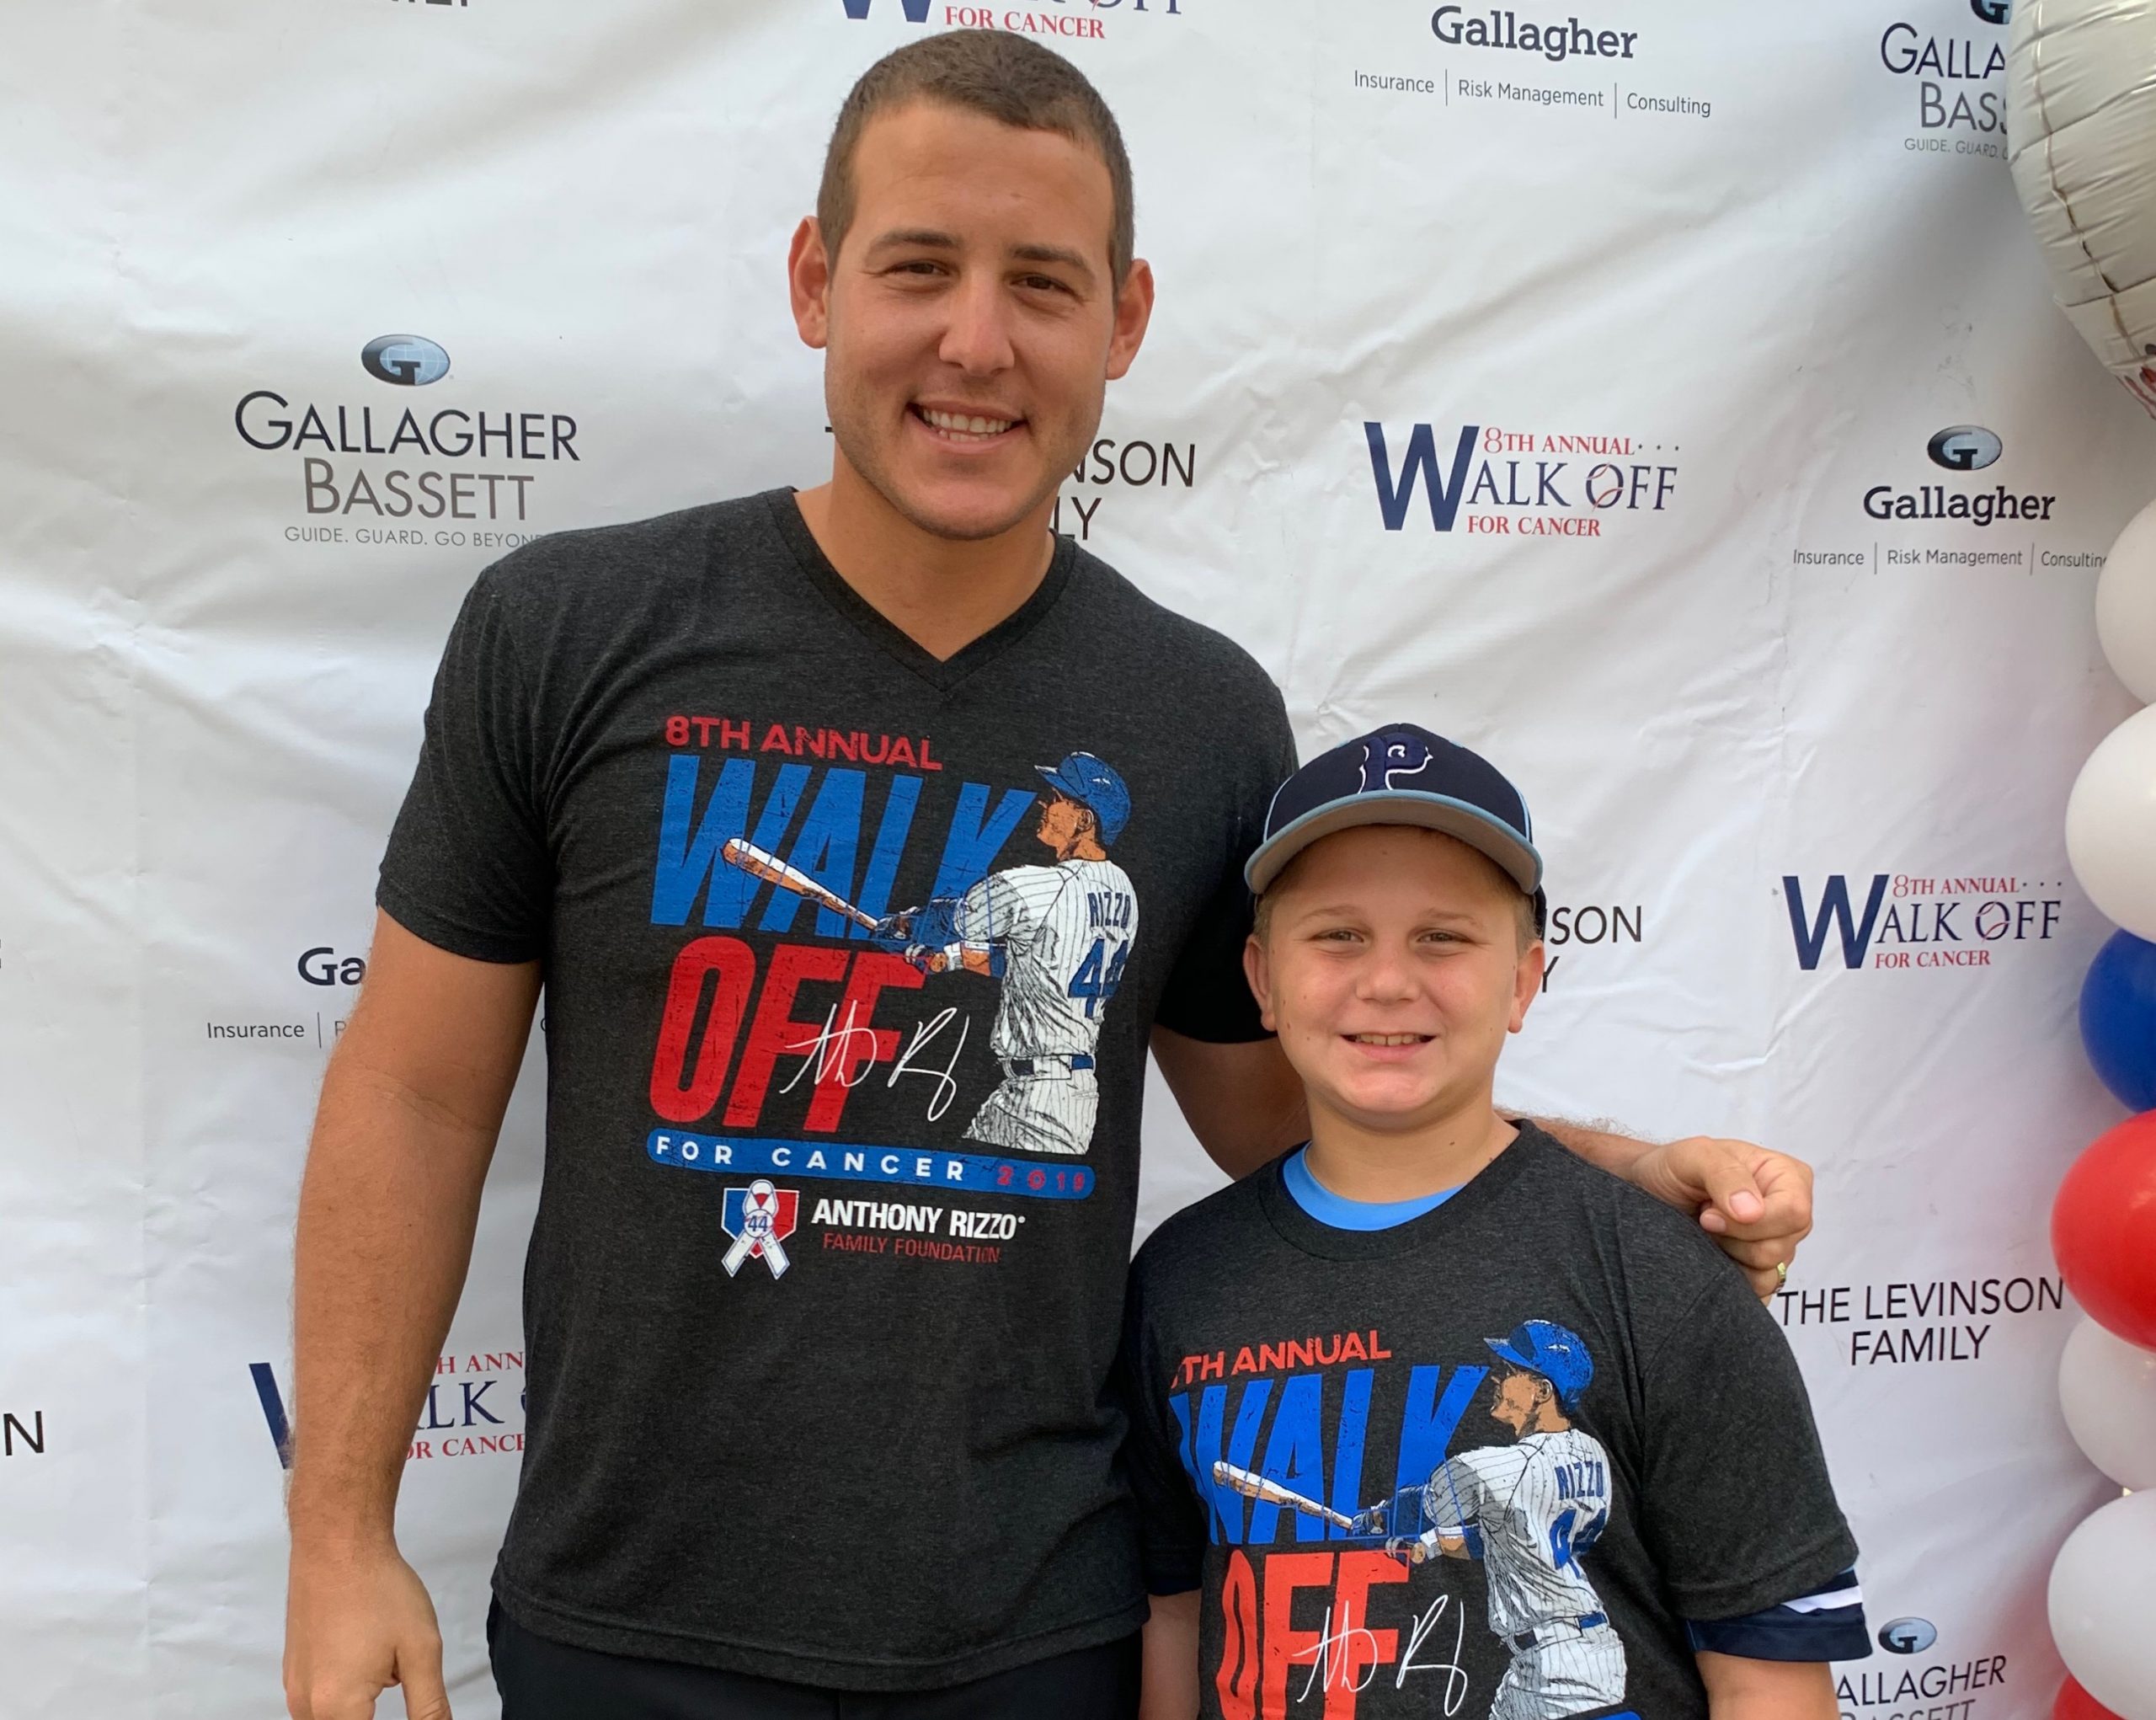 Anthony Rizzo's hosts his 8th Annual Walk-off for Cancer – Eagle